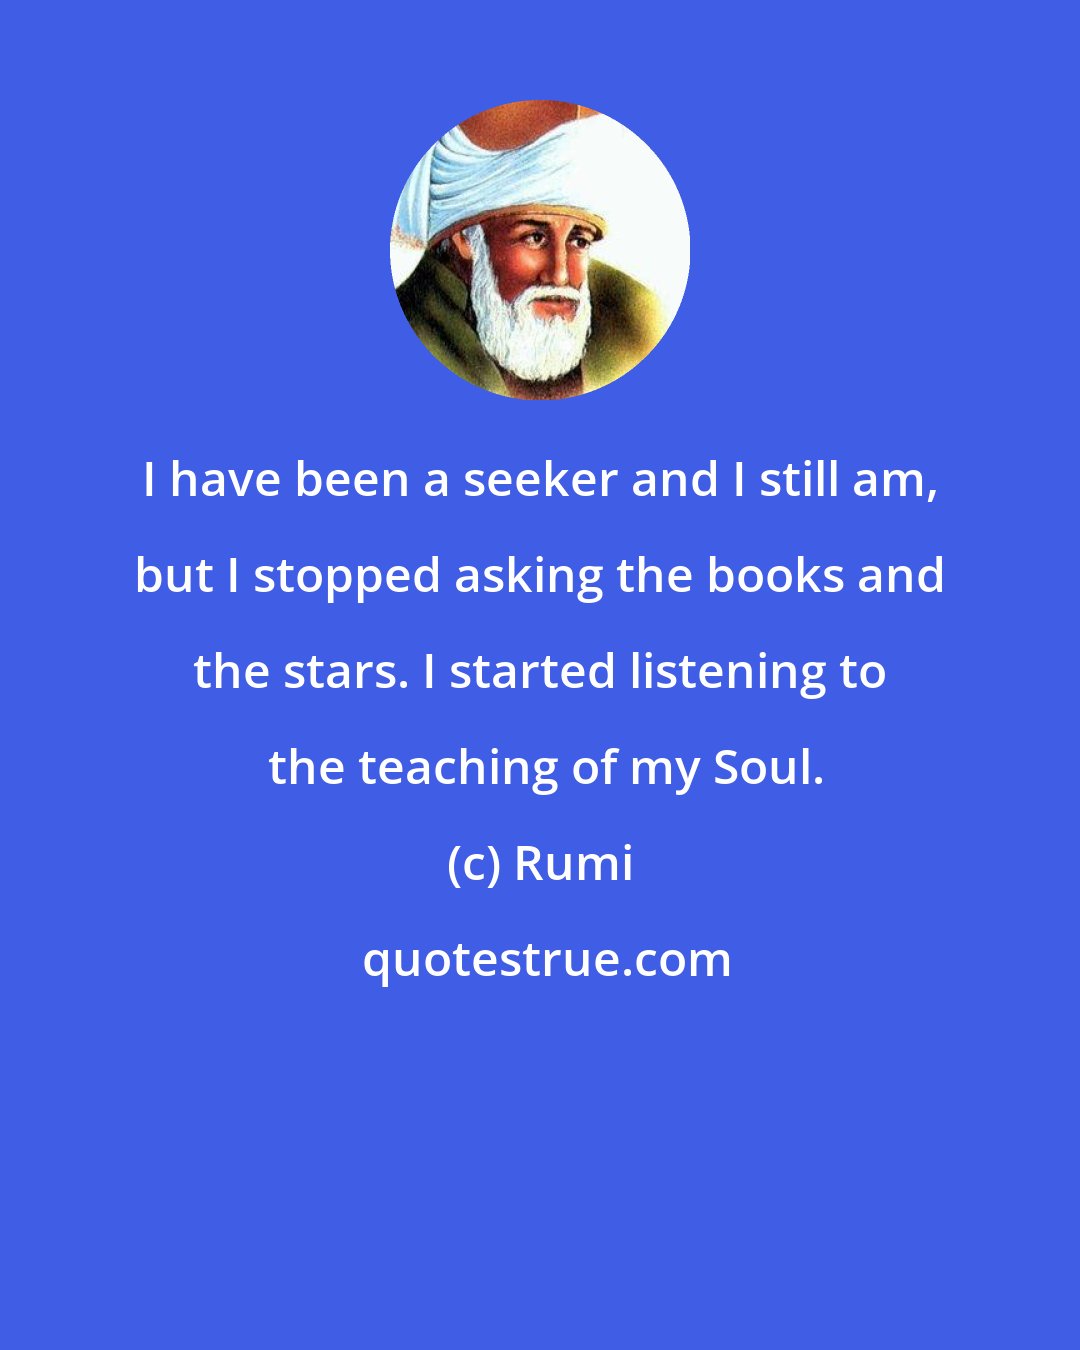 Rumi: I have been a seeker and I still am, but I stopped asking the books and the stars. I started listening to  the teaching of my Soul.